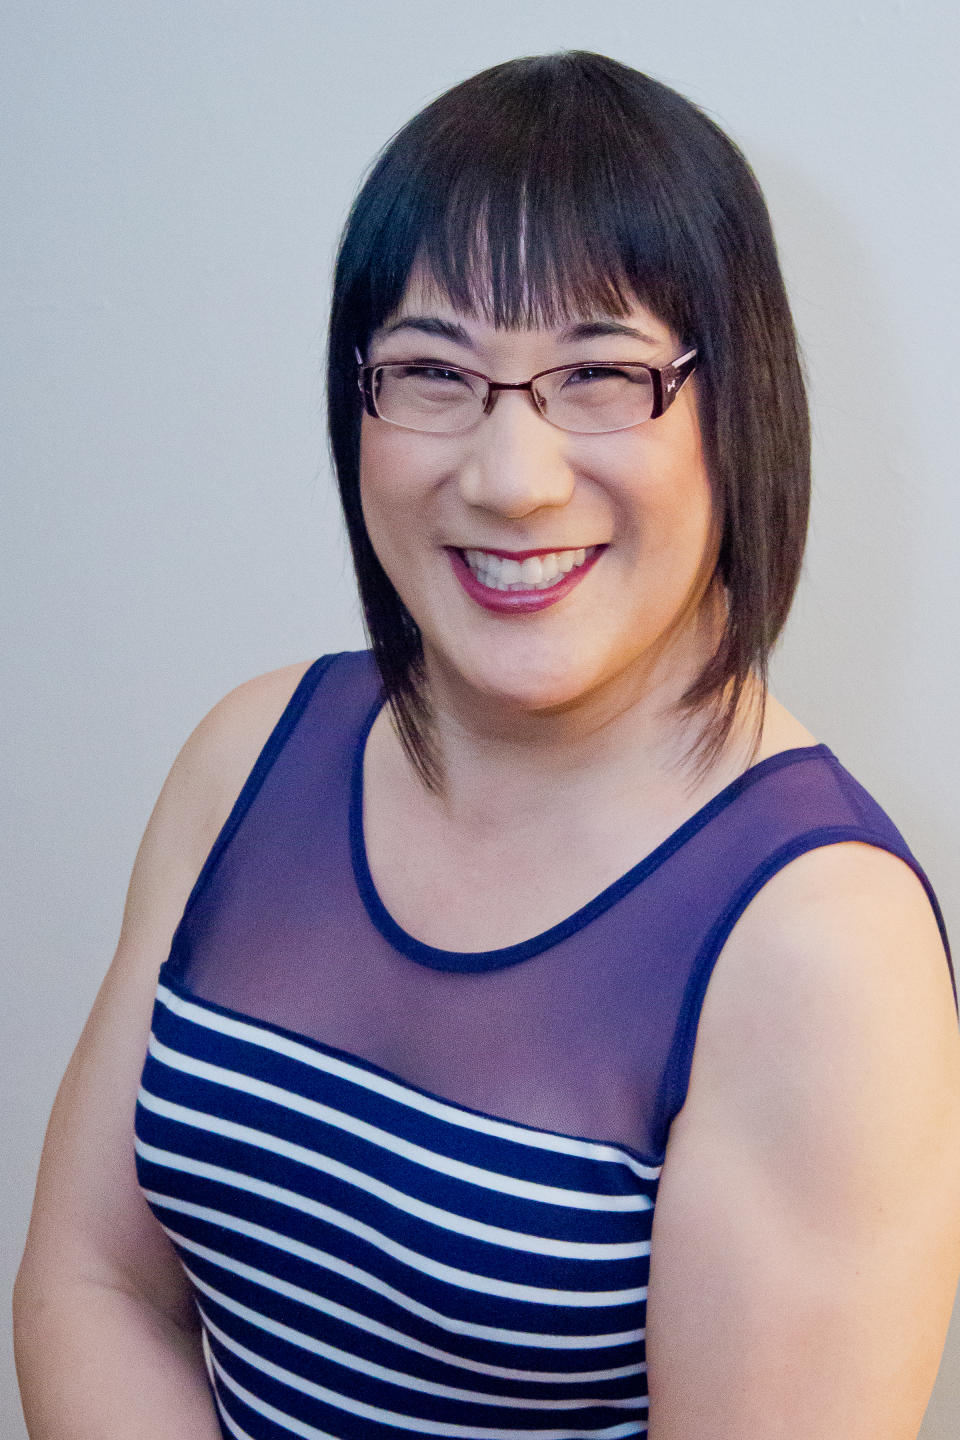 Ginger Chien worked in STEM for years before she felt comfortable transitioning. Now, she is proud to be living authentically as a transgender woman in tech. Photo Credit: Alison Peacock.
